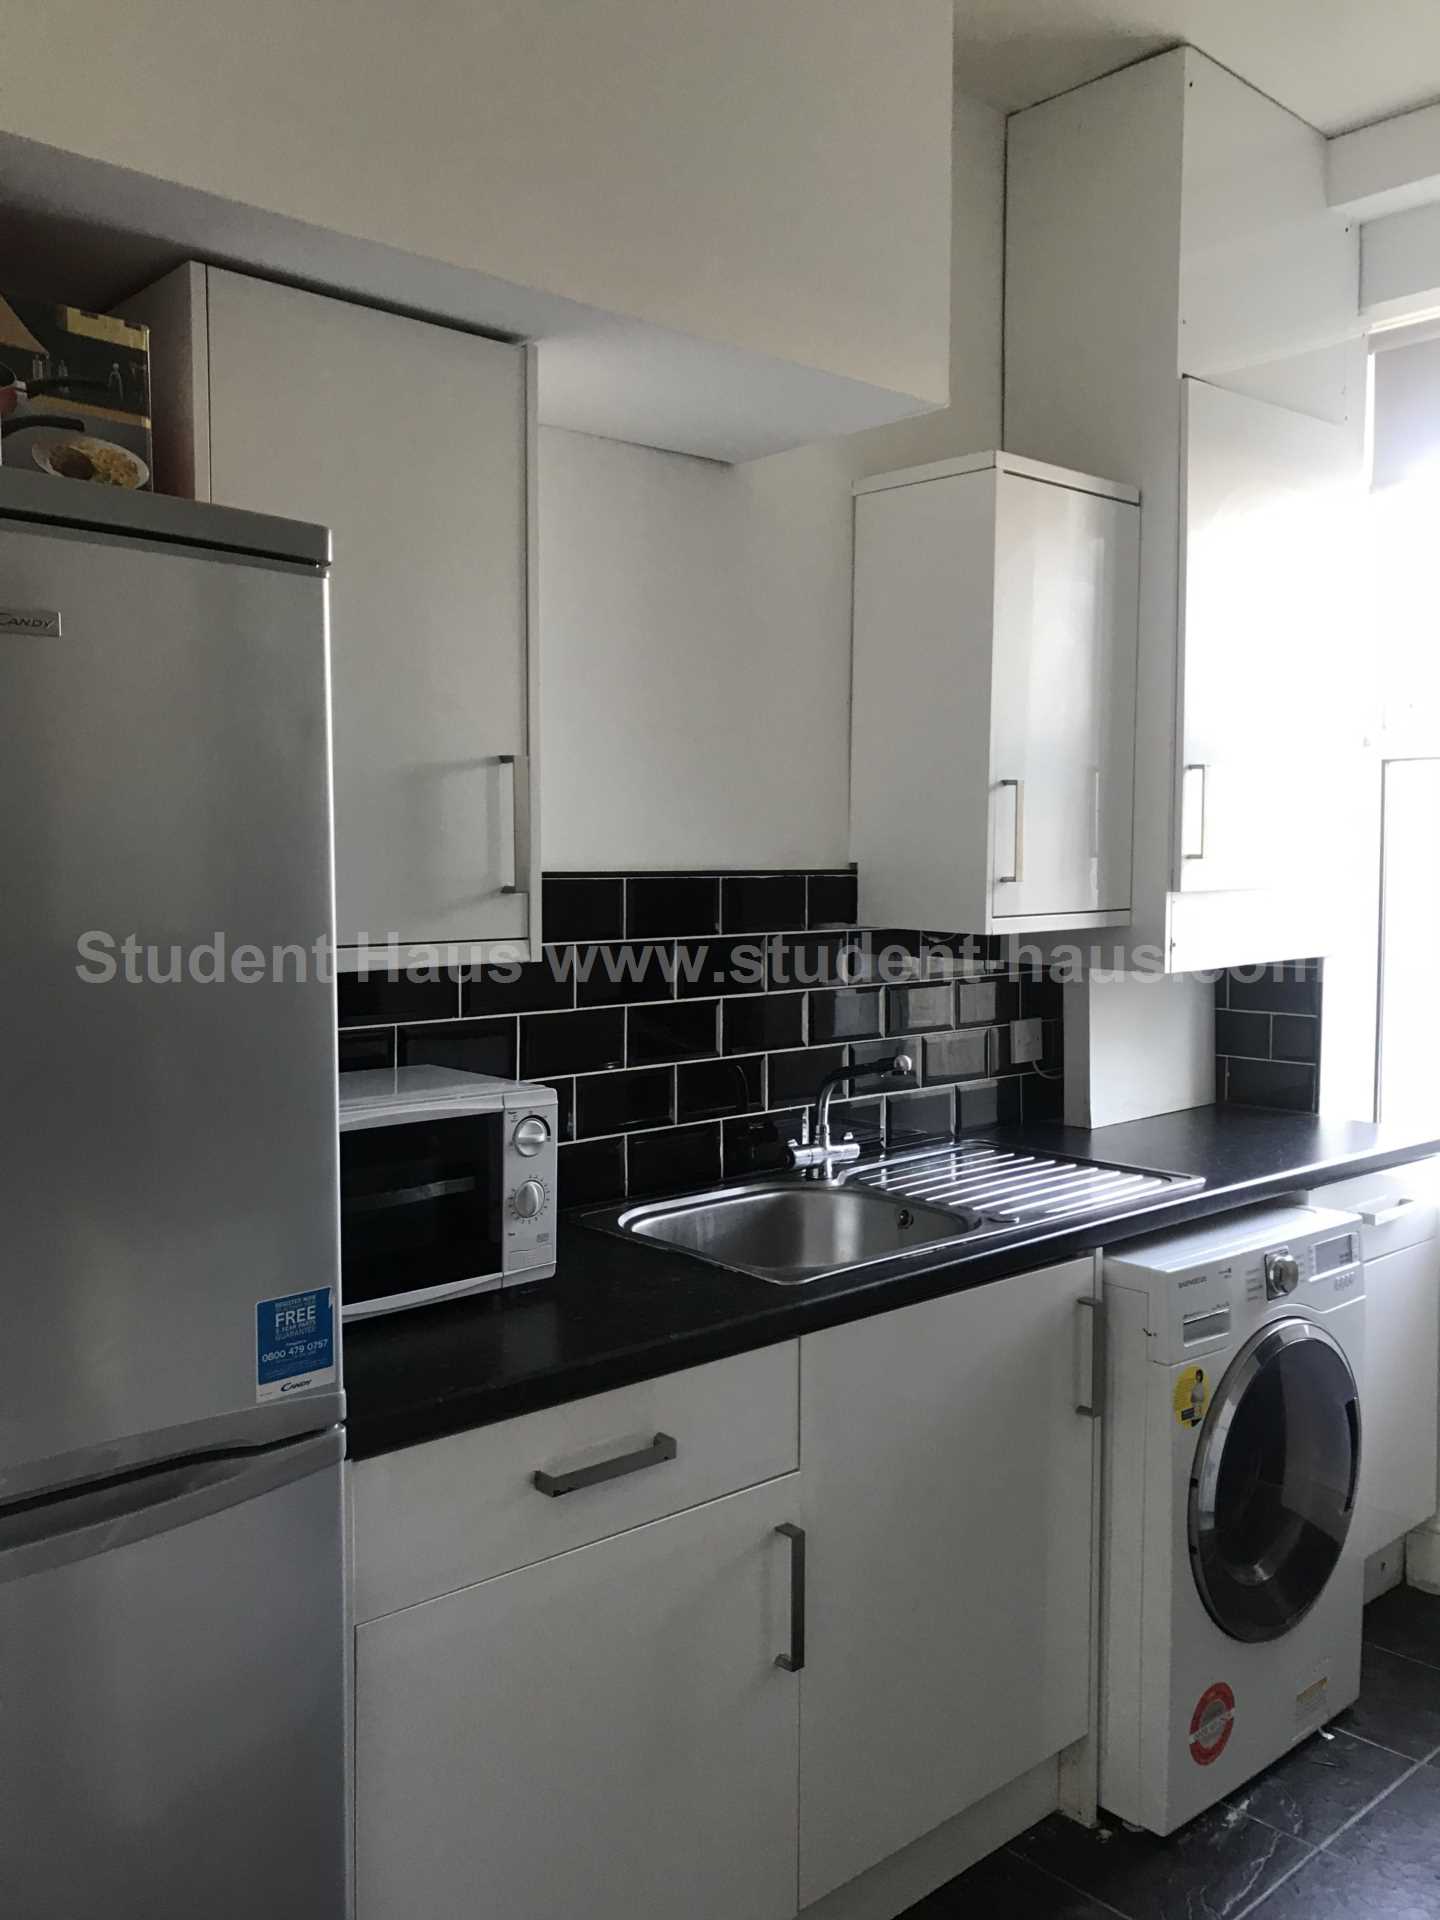 4 bed Room for rent in Liverpool. From Student Haus